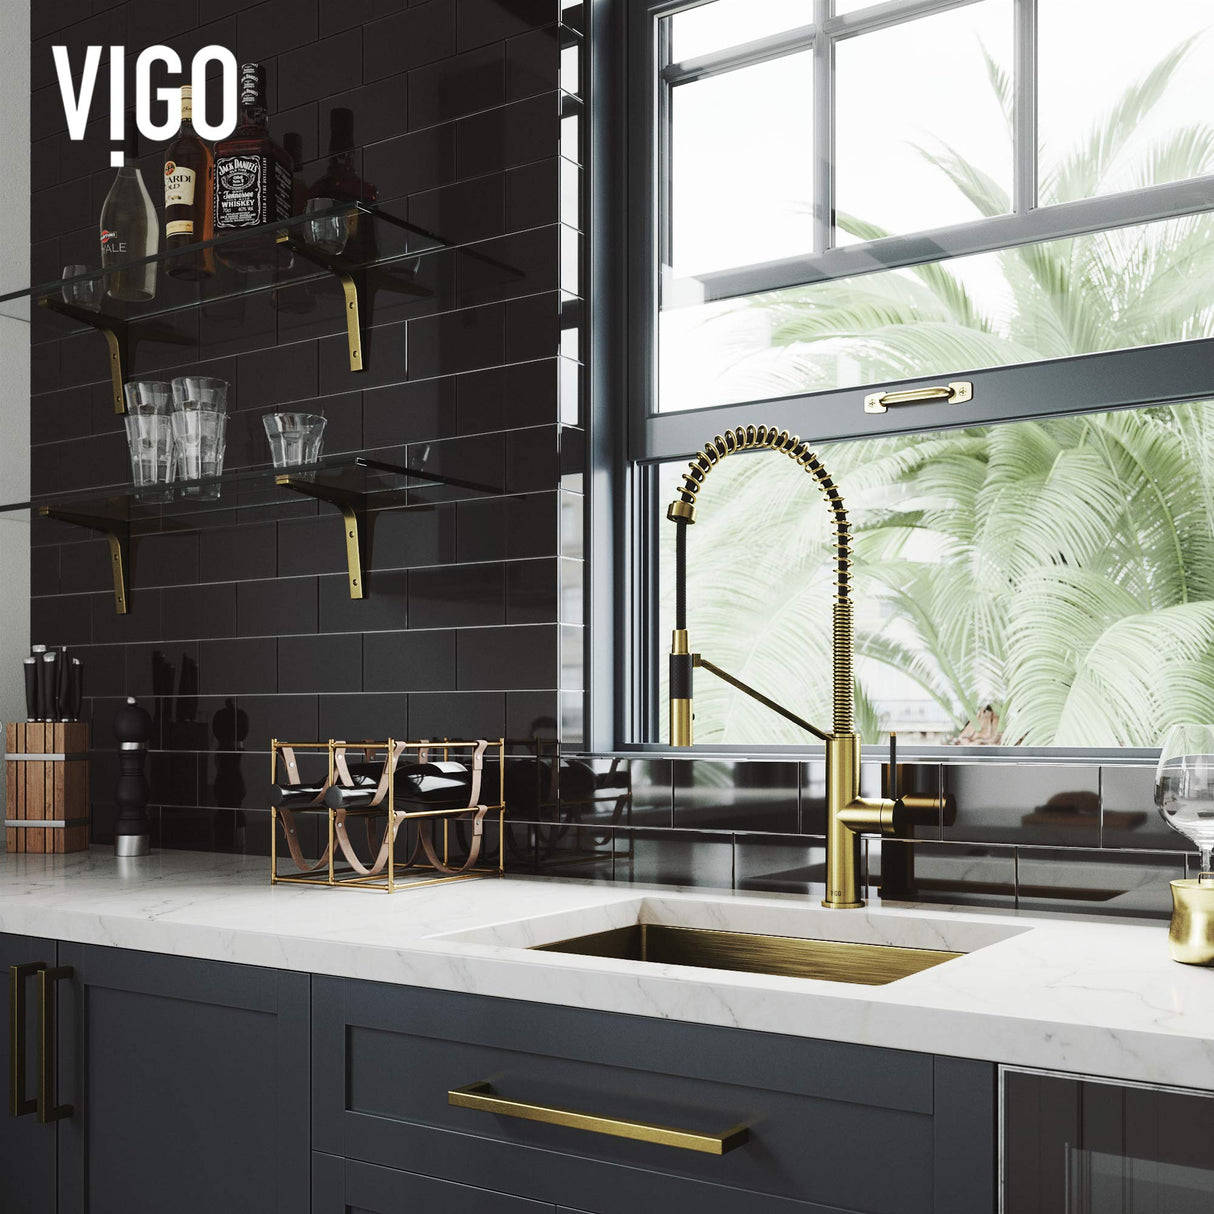 VIGO Livingston Matte Gold Kitchen Faucet with Pull-Down Sprayer | Solid Brass Faucet for Kitchen Sink with 1.8 GPM Magnetic Spout | Single-Handle Kitchen Sink Faucet with Swivel Sink Sprayer